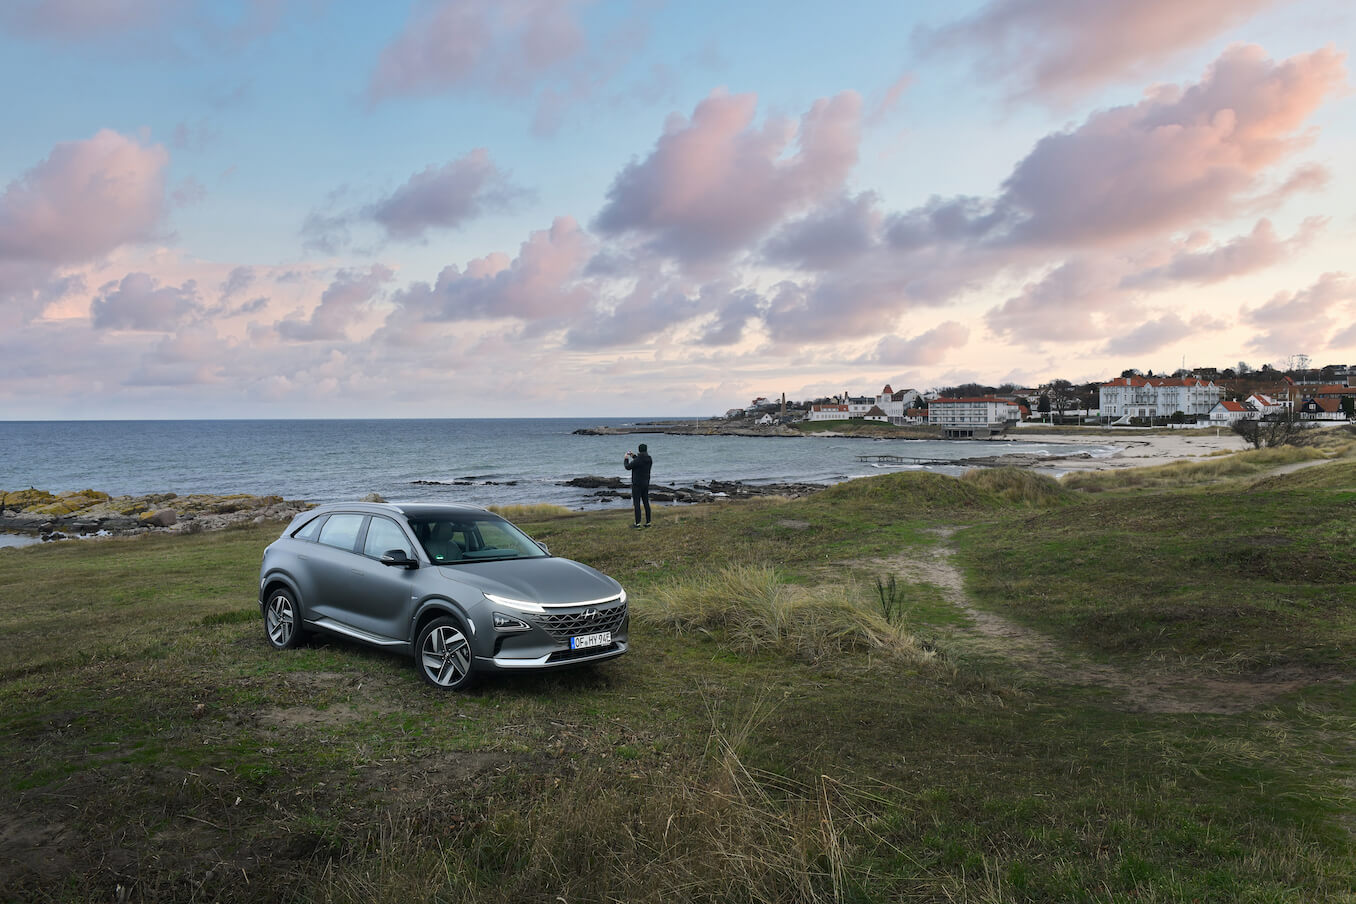 A gray Hyundai Nexo parked along the coastline at the beach. The Hyundai Nexo's hydrogen fuel cell makes it a unique model.